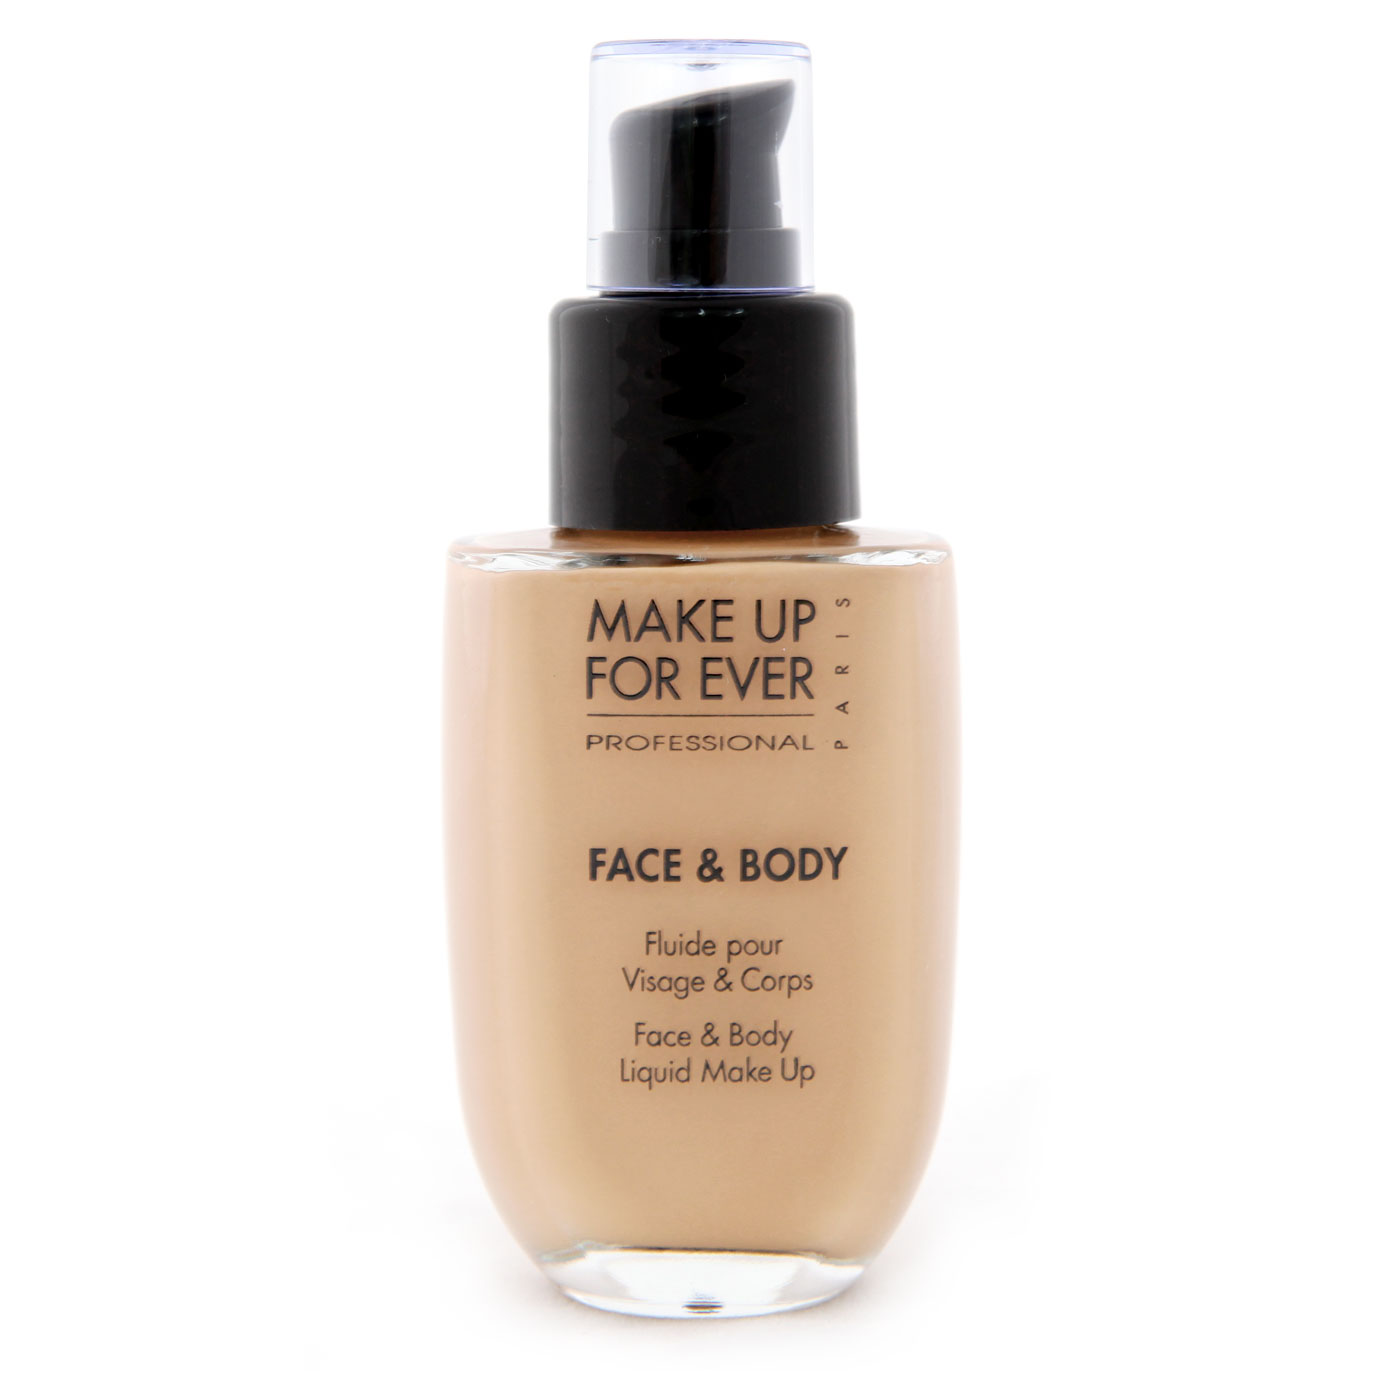 Make up for ever face and body foundation